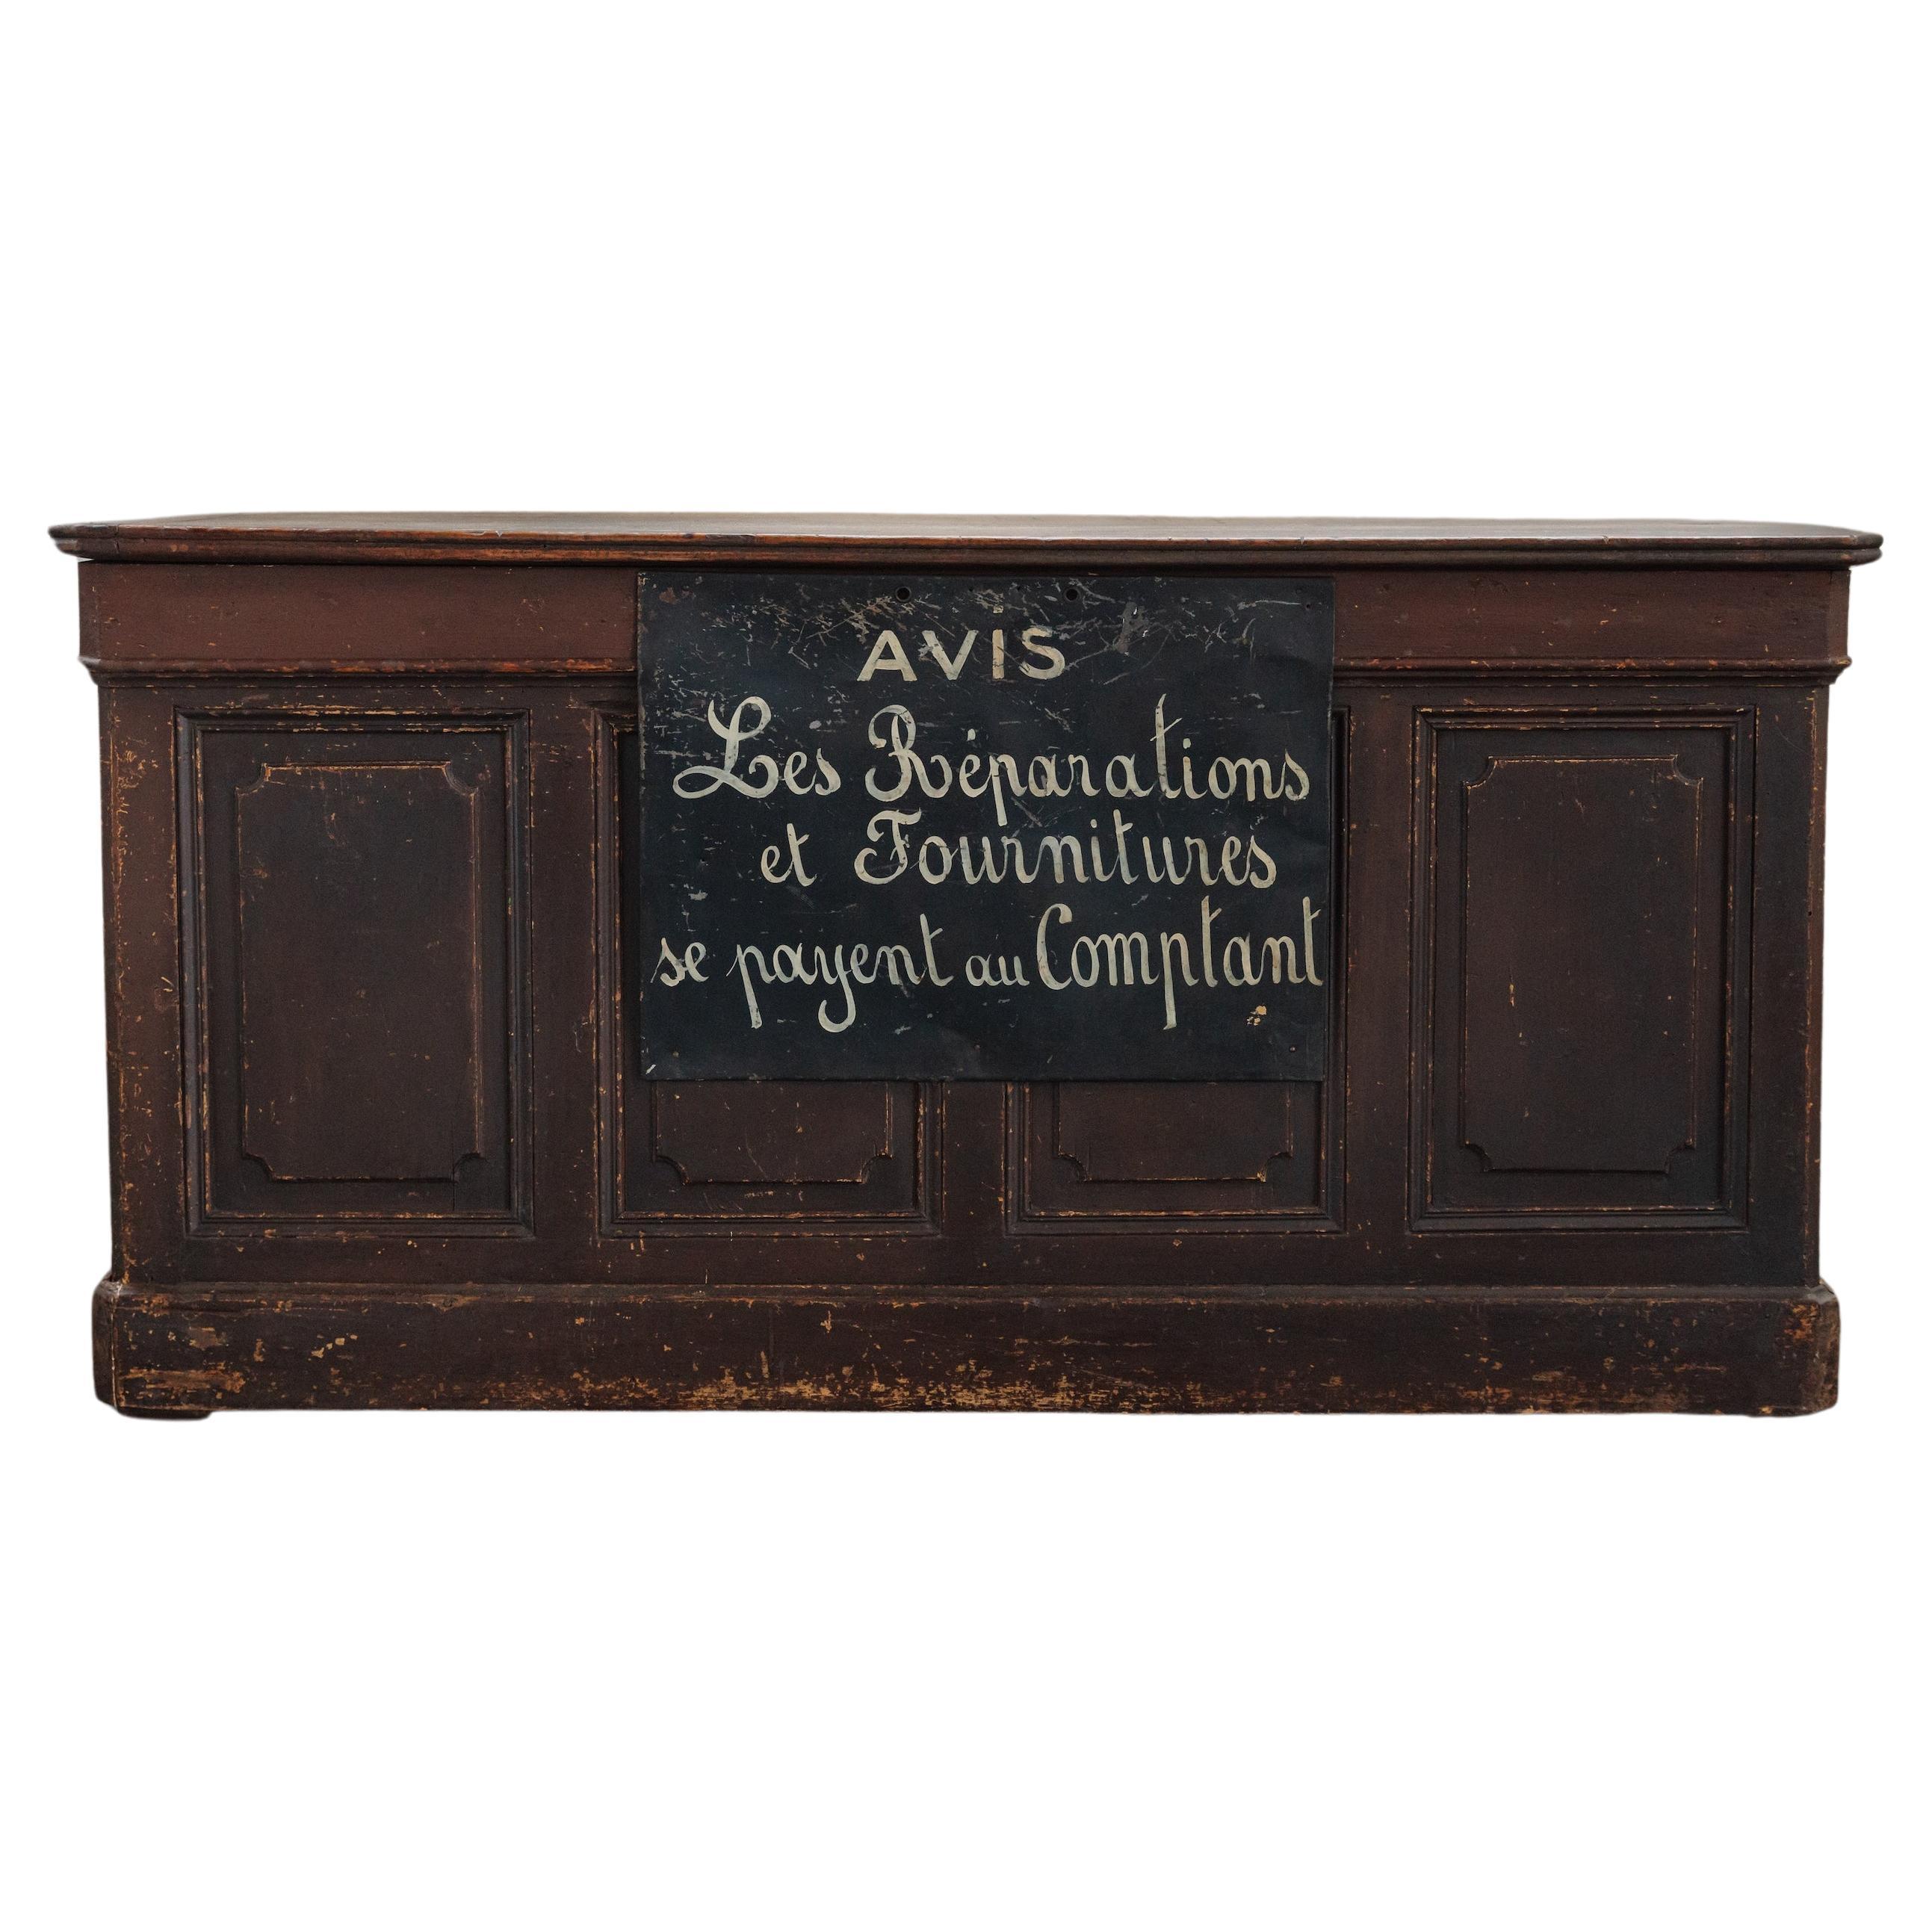 Early Pine Shop Counter From France, Circa 1900